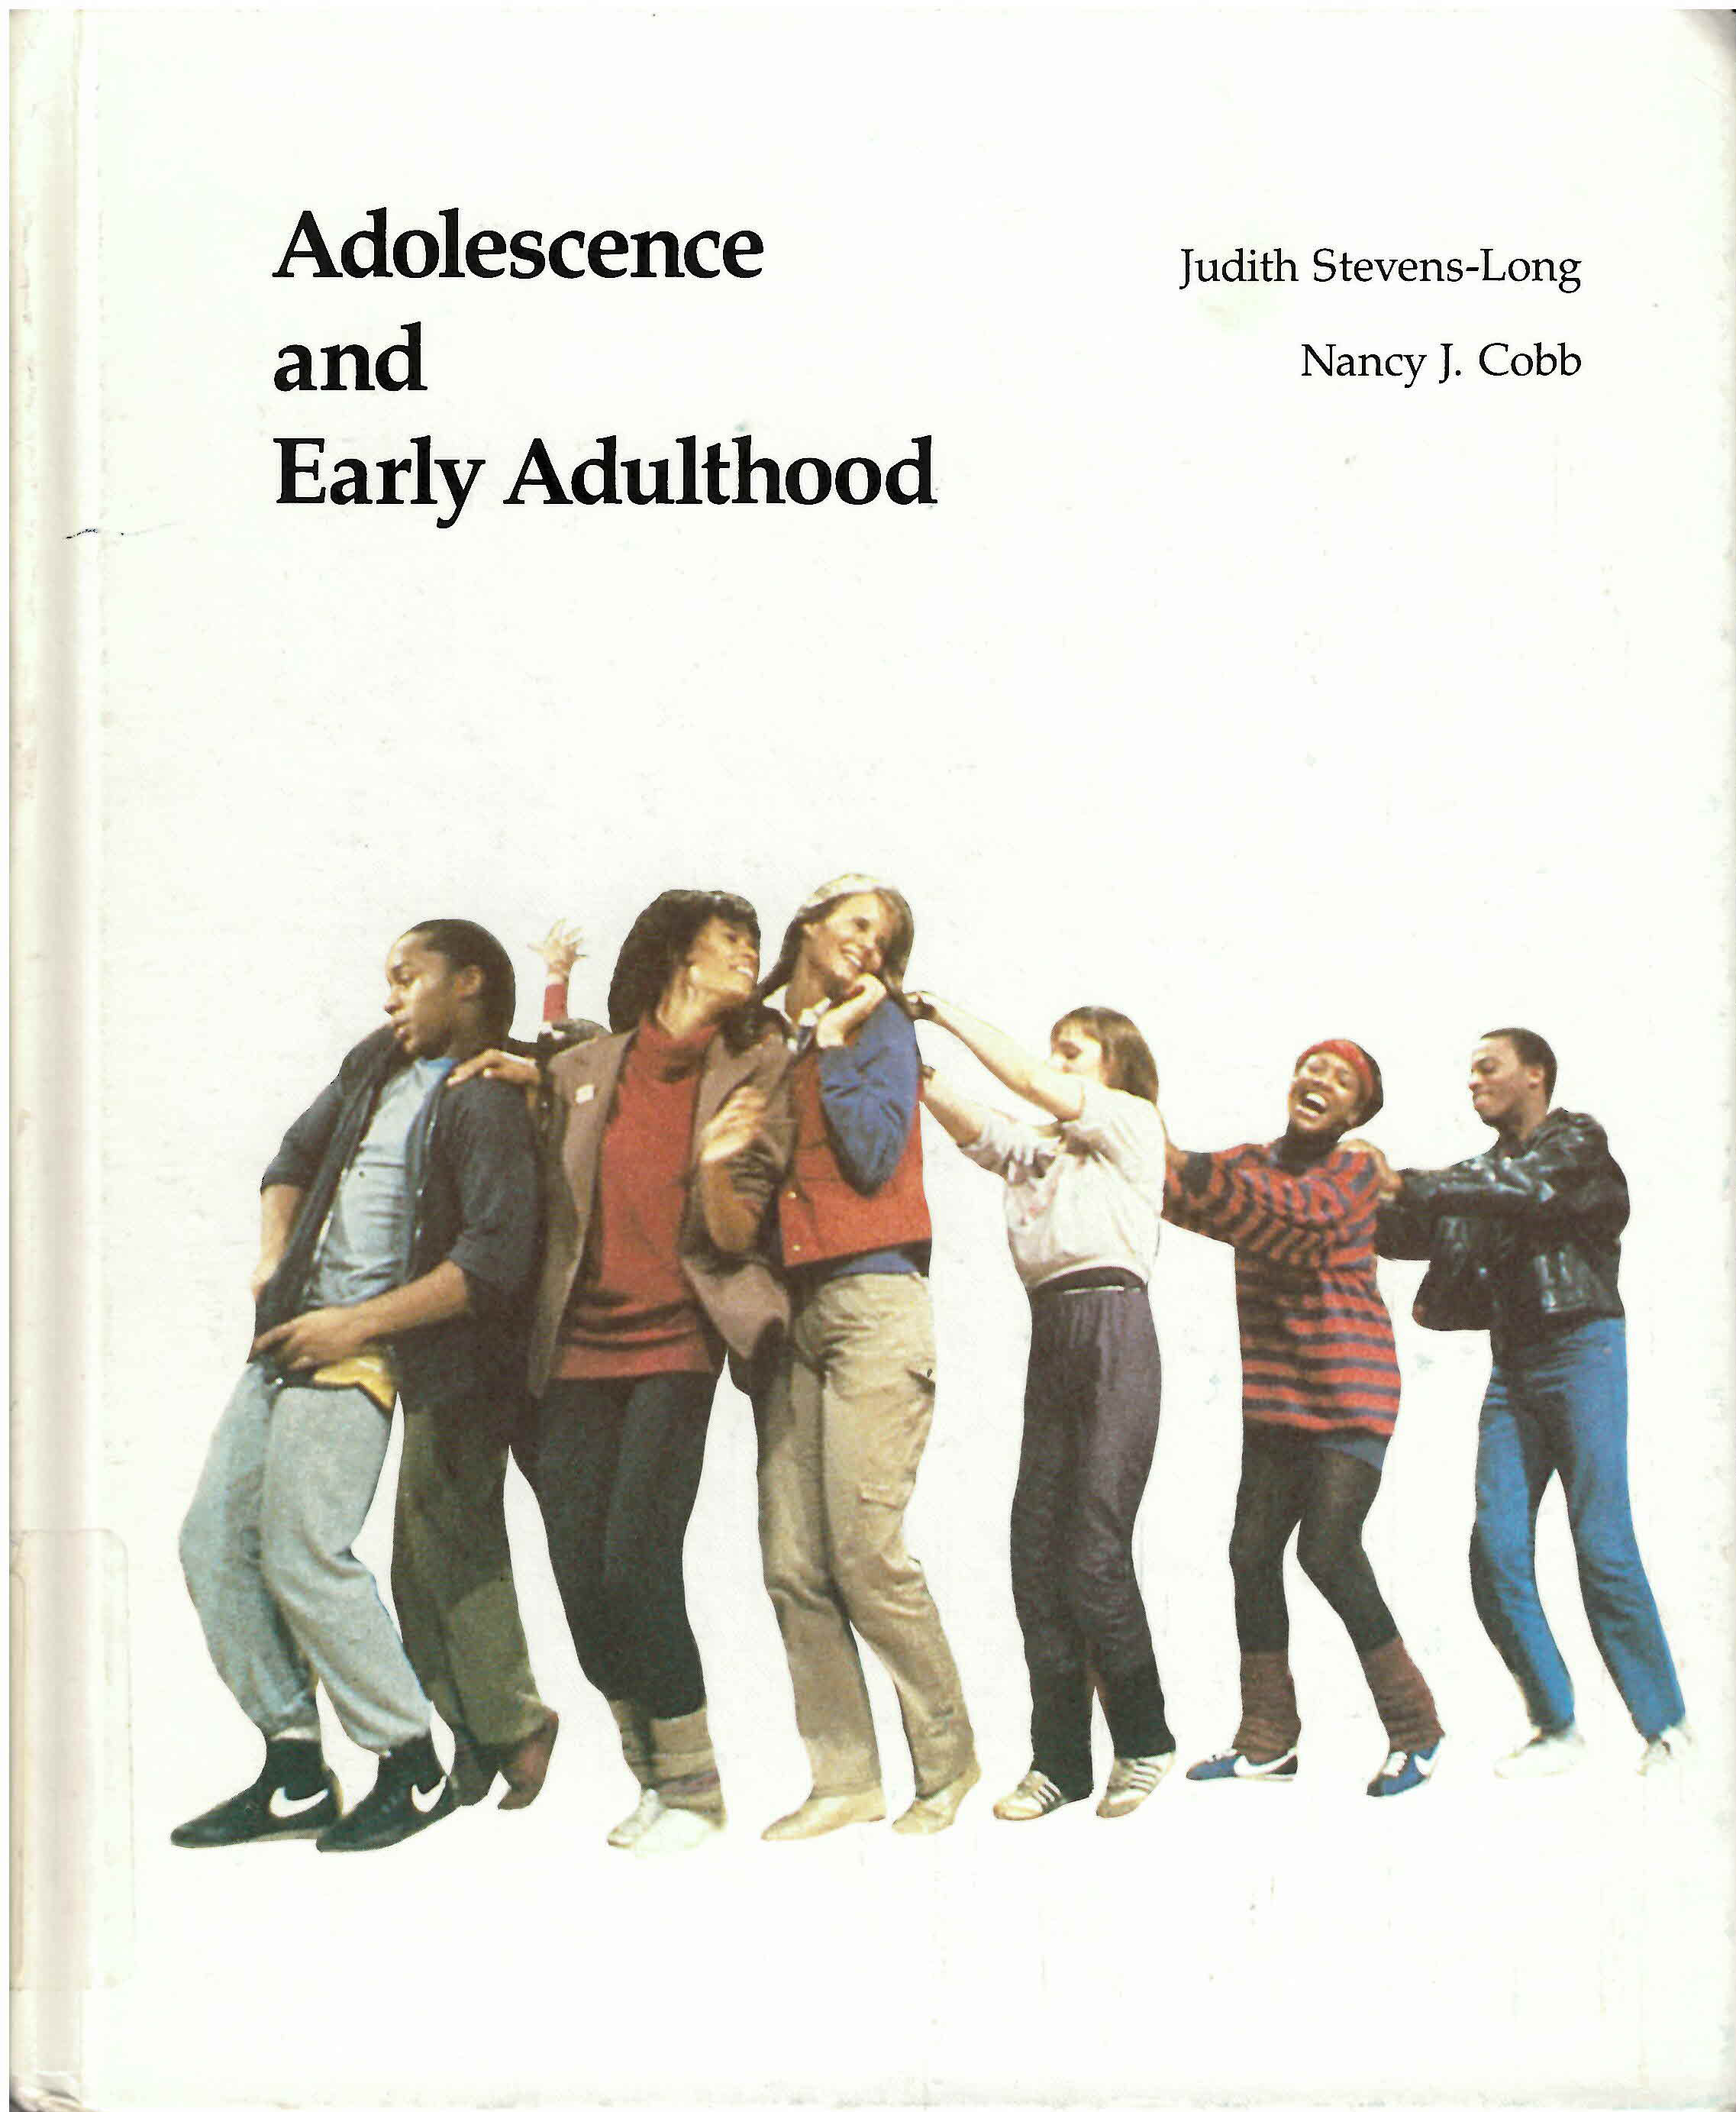 Adolescence and early adulthood